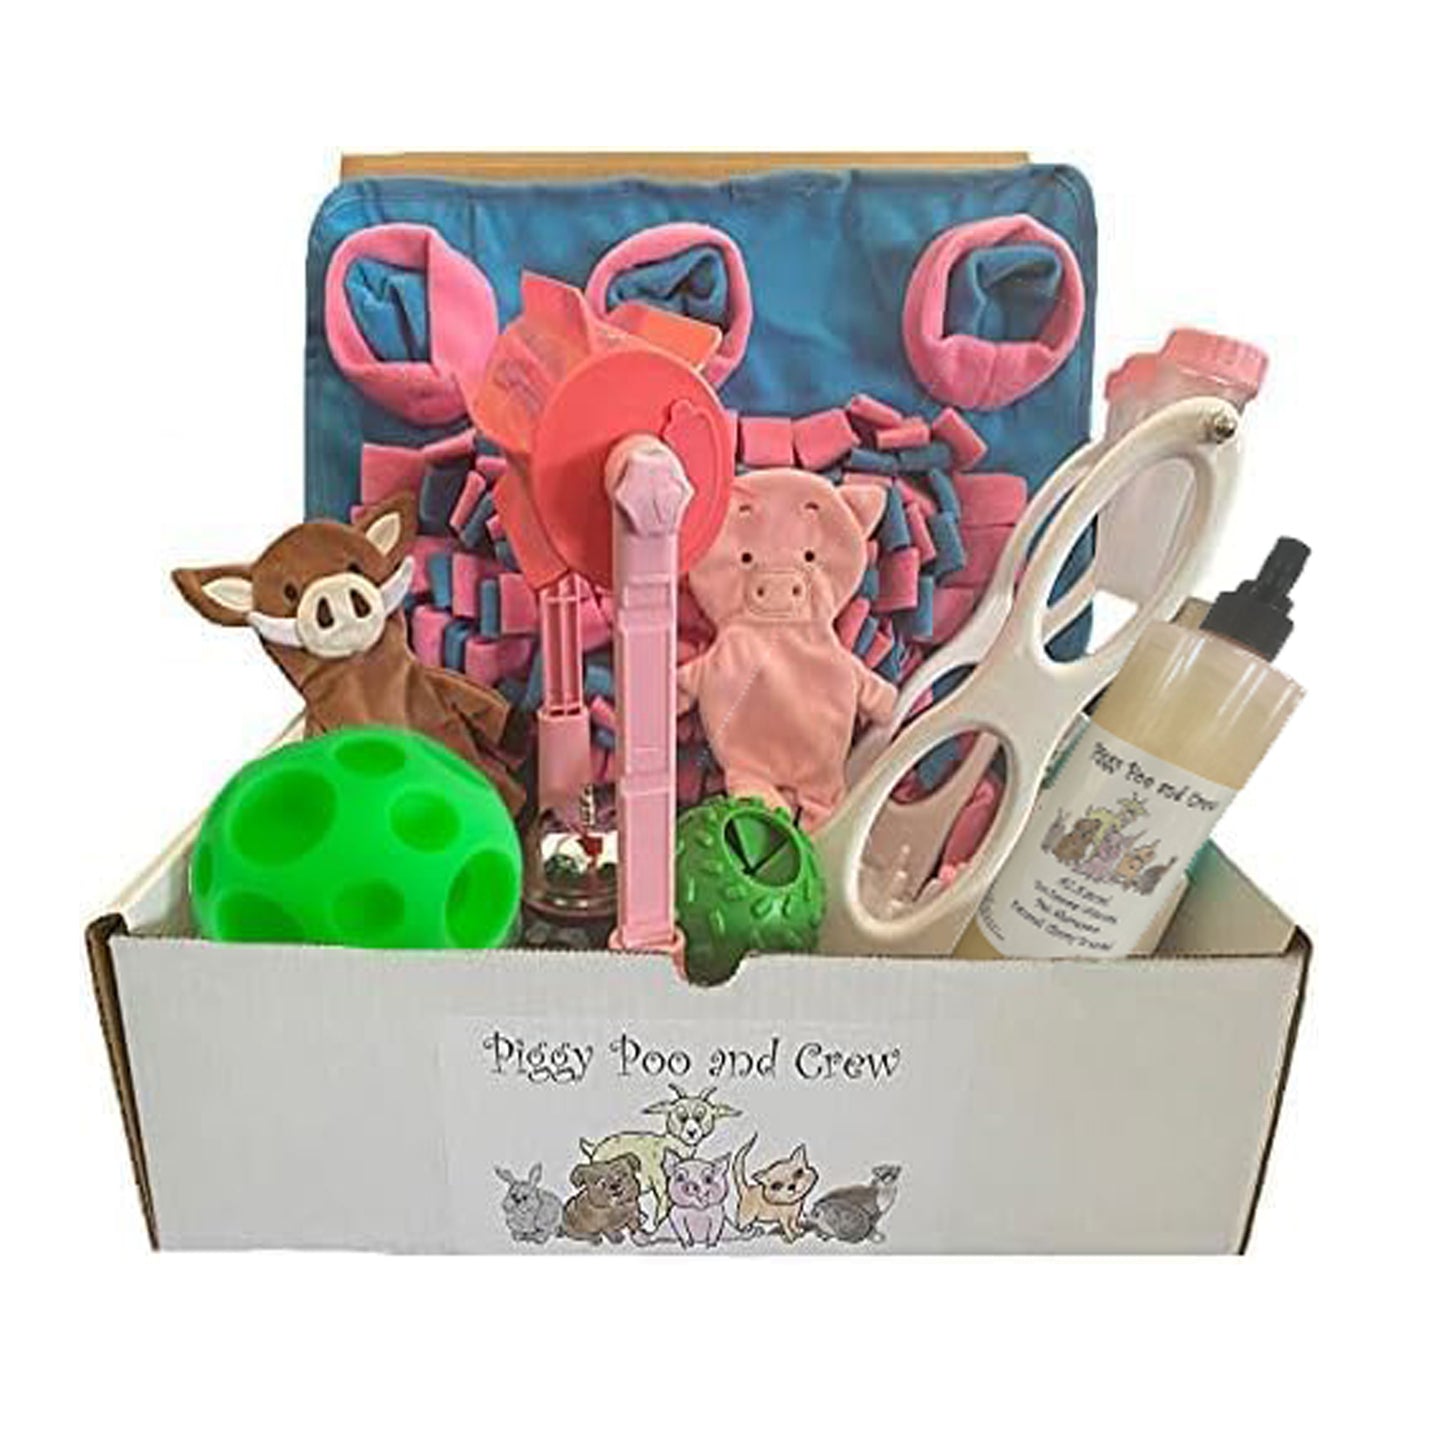 Piggy Poo and Crew Pig and Pet Box Bundle of Toys Gift Box New Pet Owner